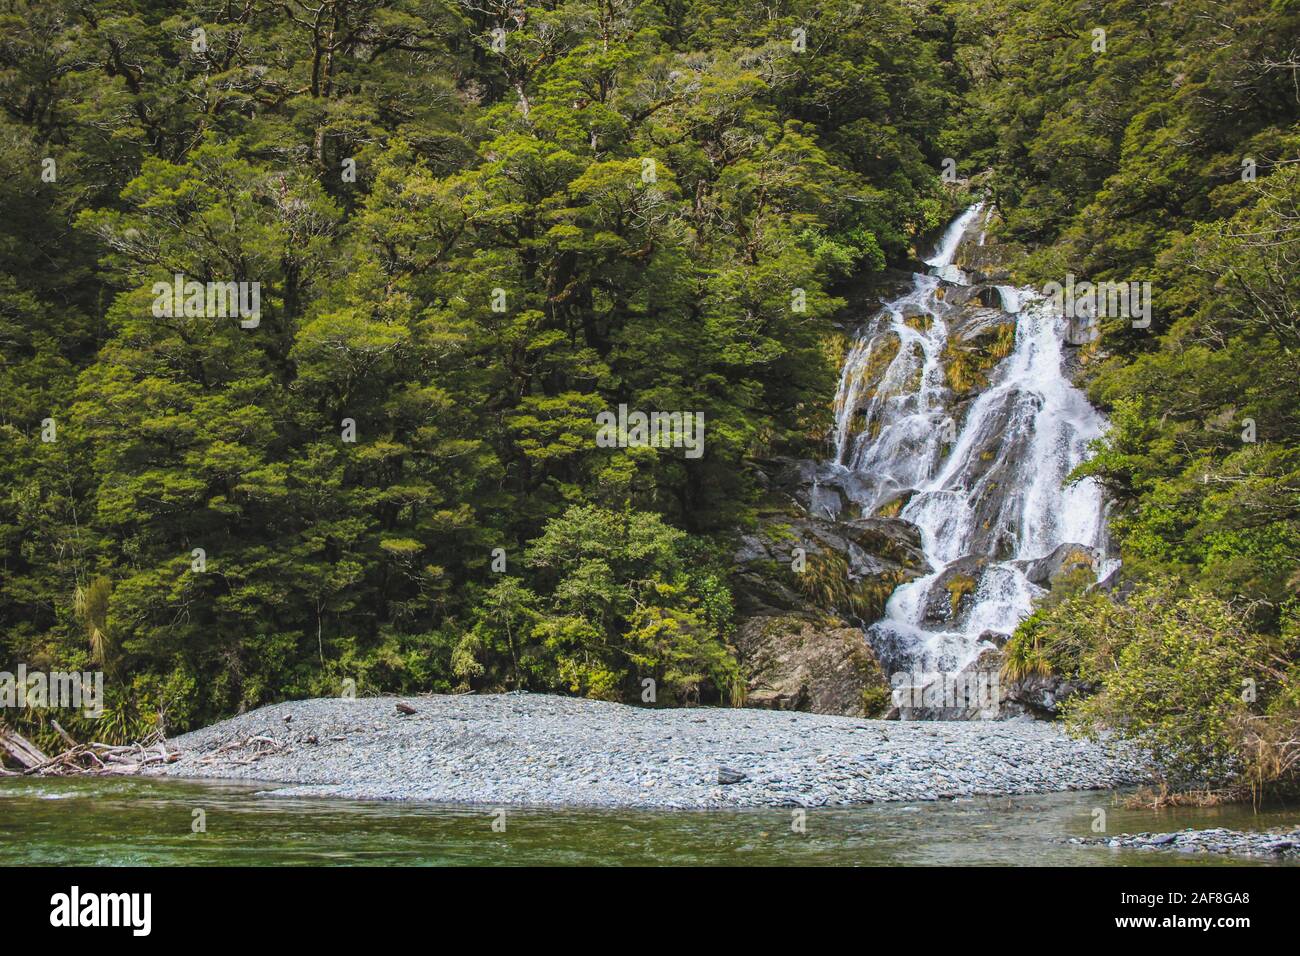 Fantail Falls, picturesque waterfall in Mount Aspiring National Park, South Island, New Zealand Stock Photo